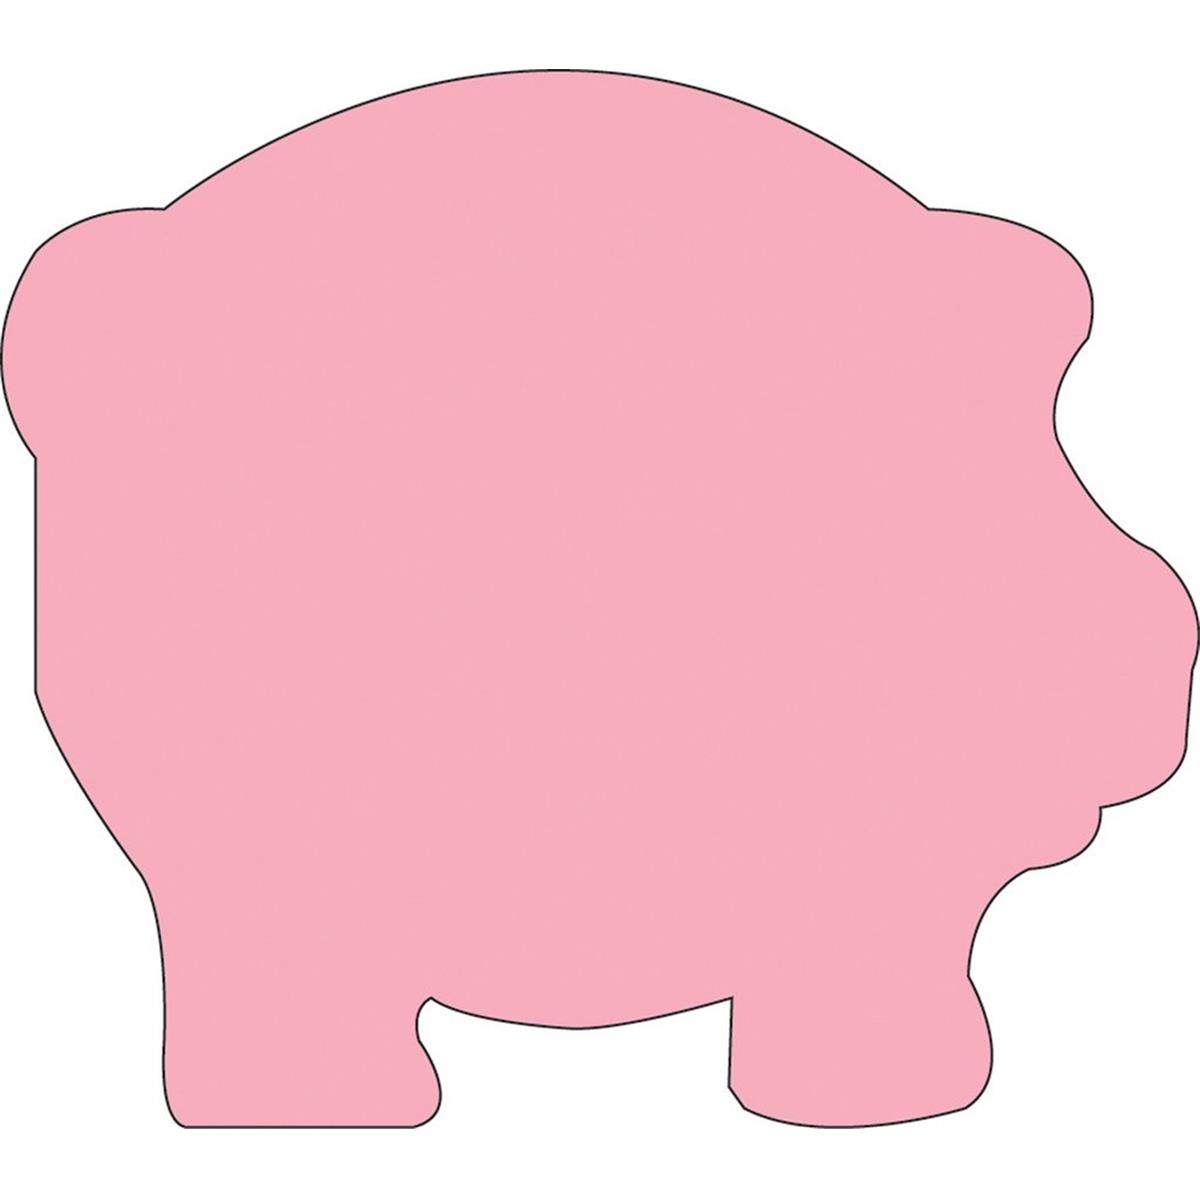 Se-0934 4.5 X 4 In. Small Single Color Sticky Shape Notepad, Pig - 50 Sheets Per Pack